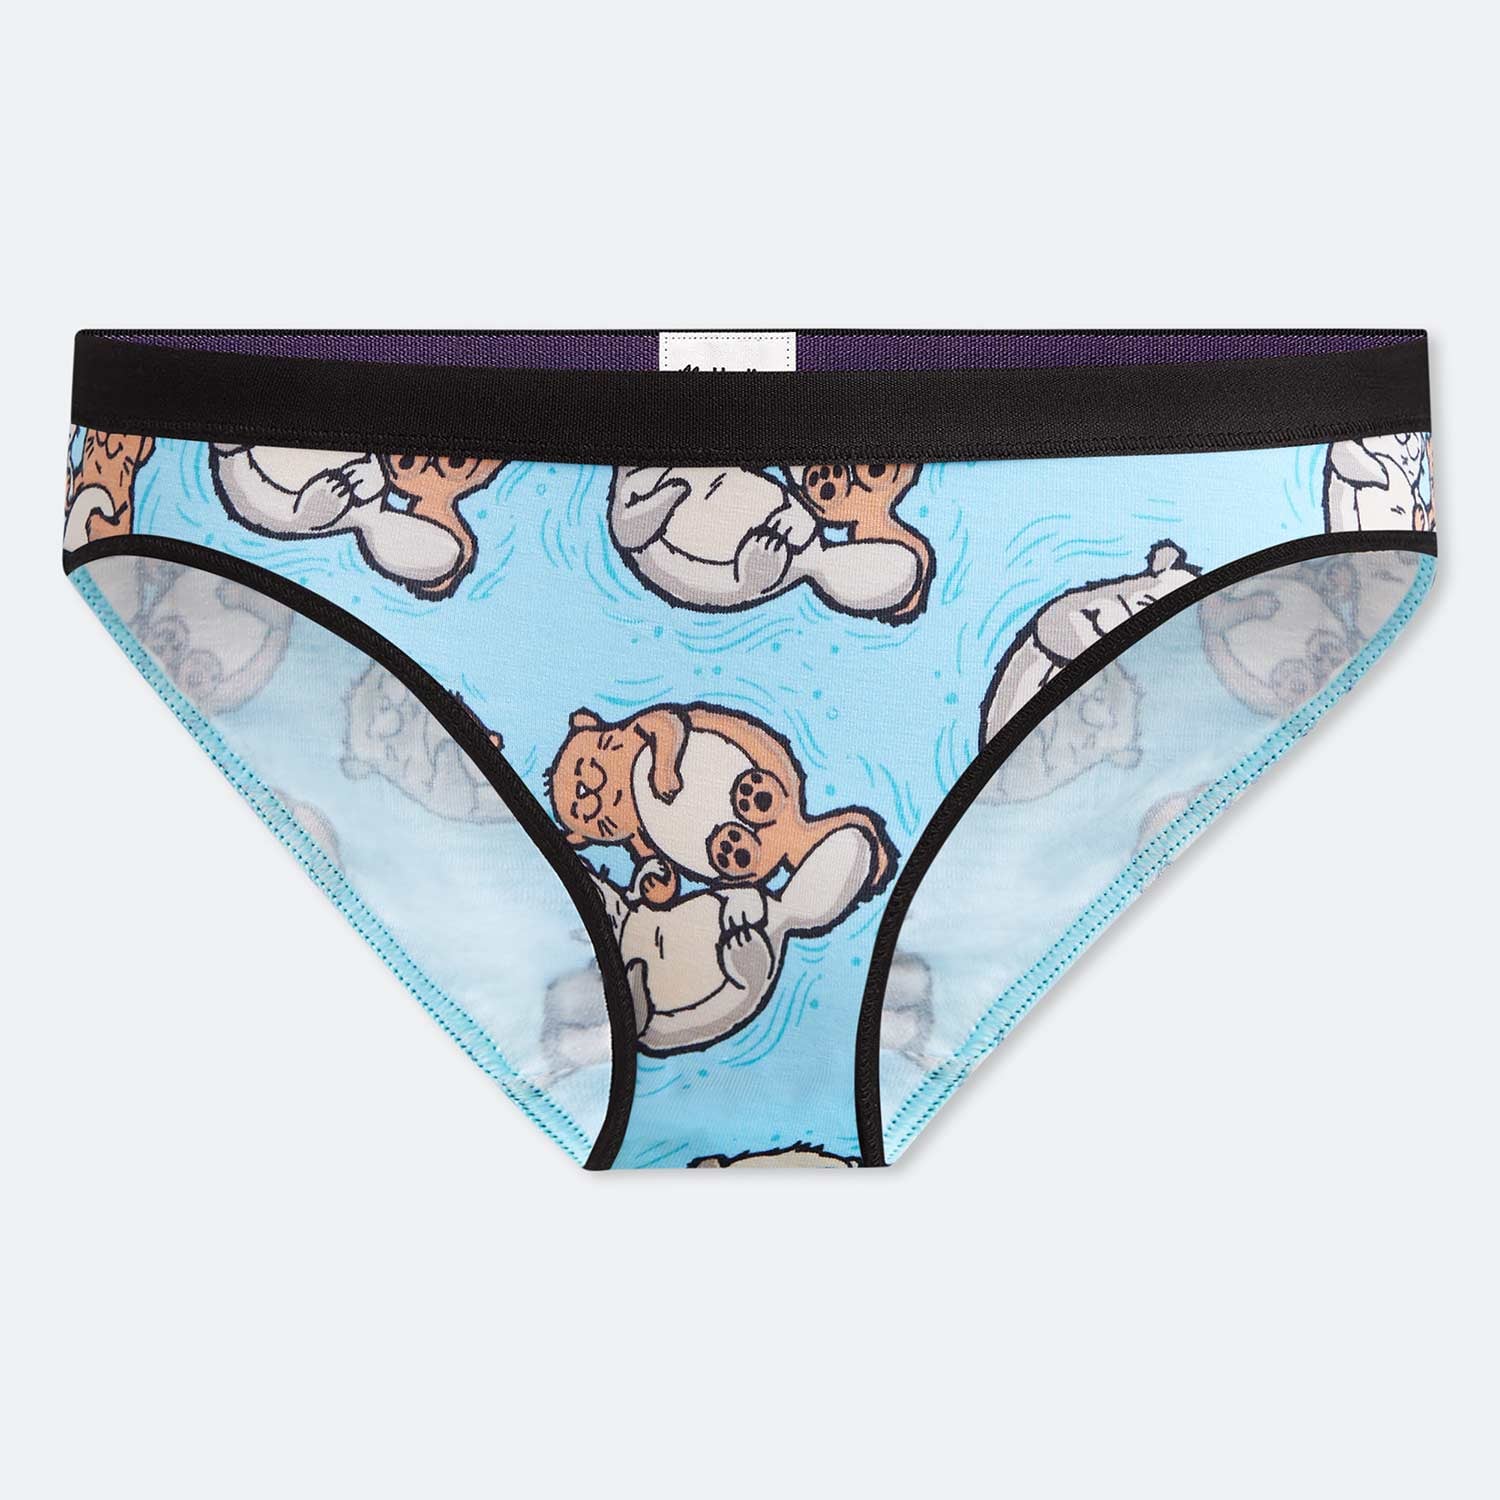 Women's Bikini, MeUndies Sells Matching Underwear For You and Your  Significant Otter, and We Need These